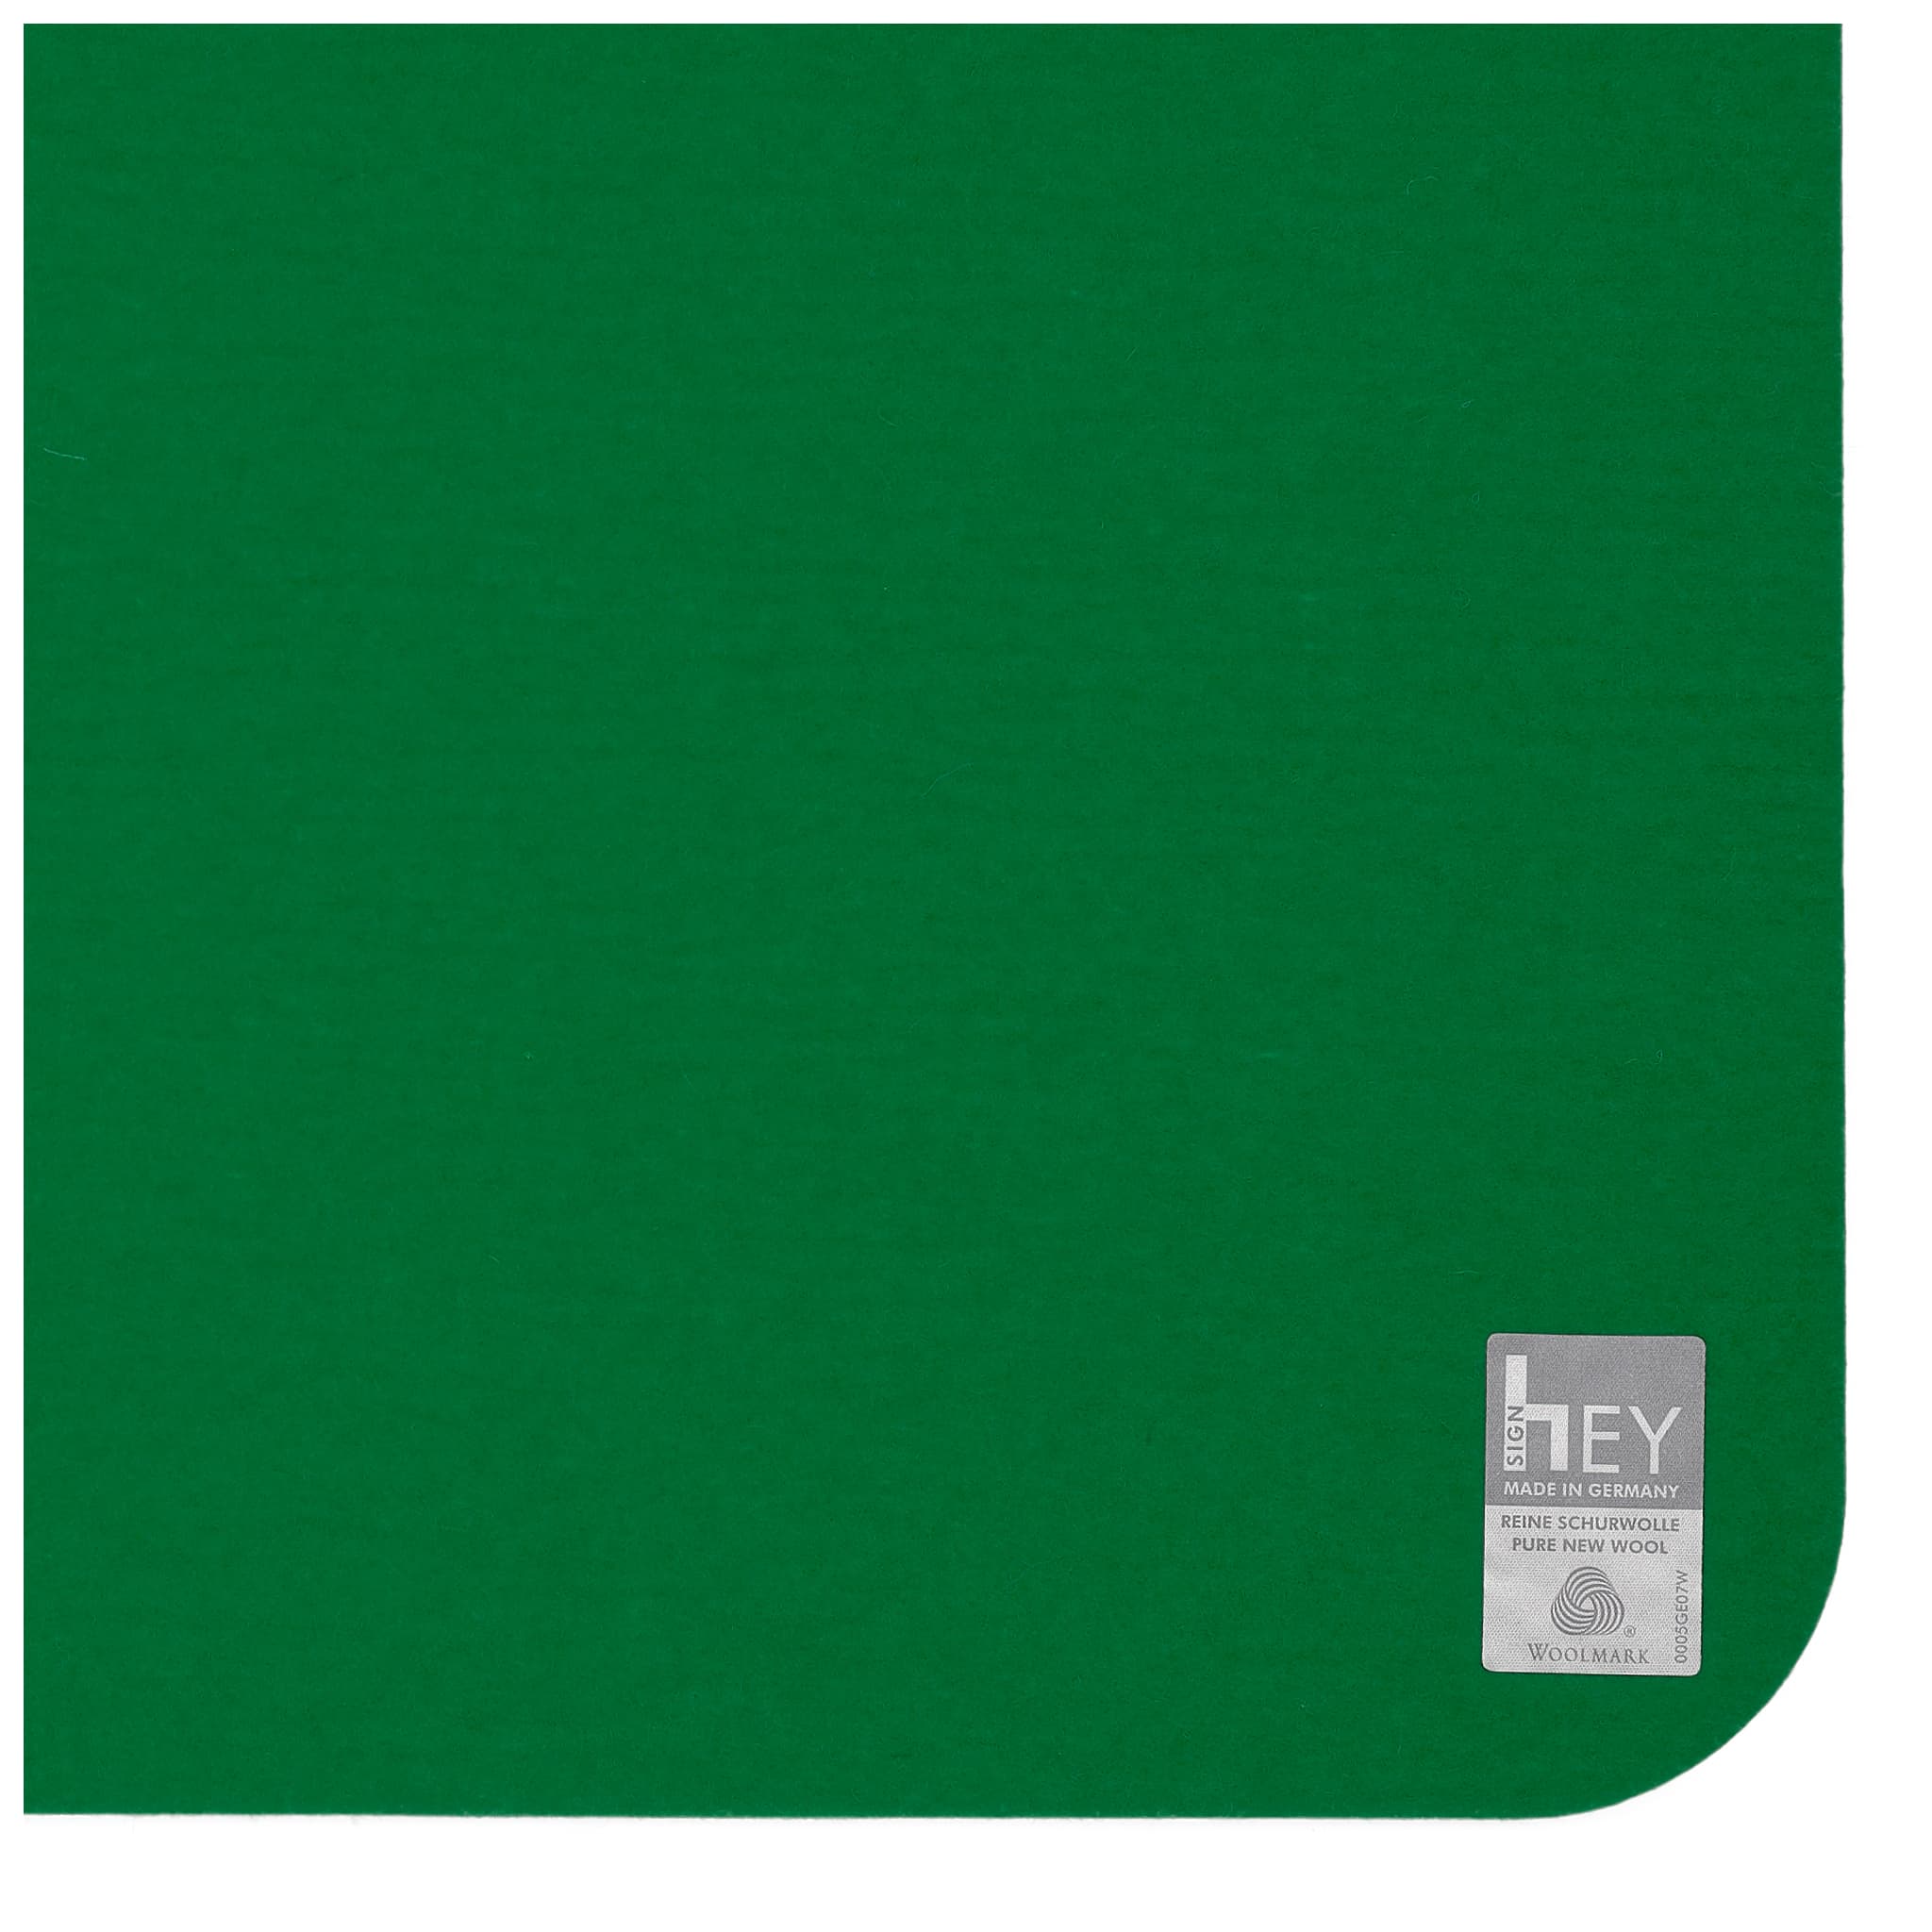 Rectangular Felt Placemat in Dark-Green by Hey-Sign 300134502 looking at Closeup-Label